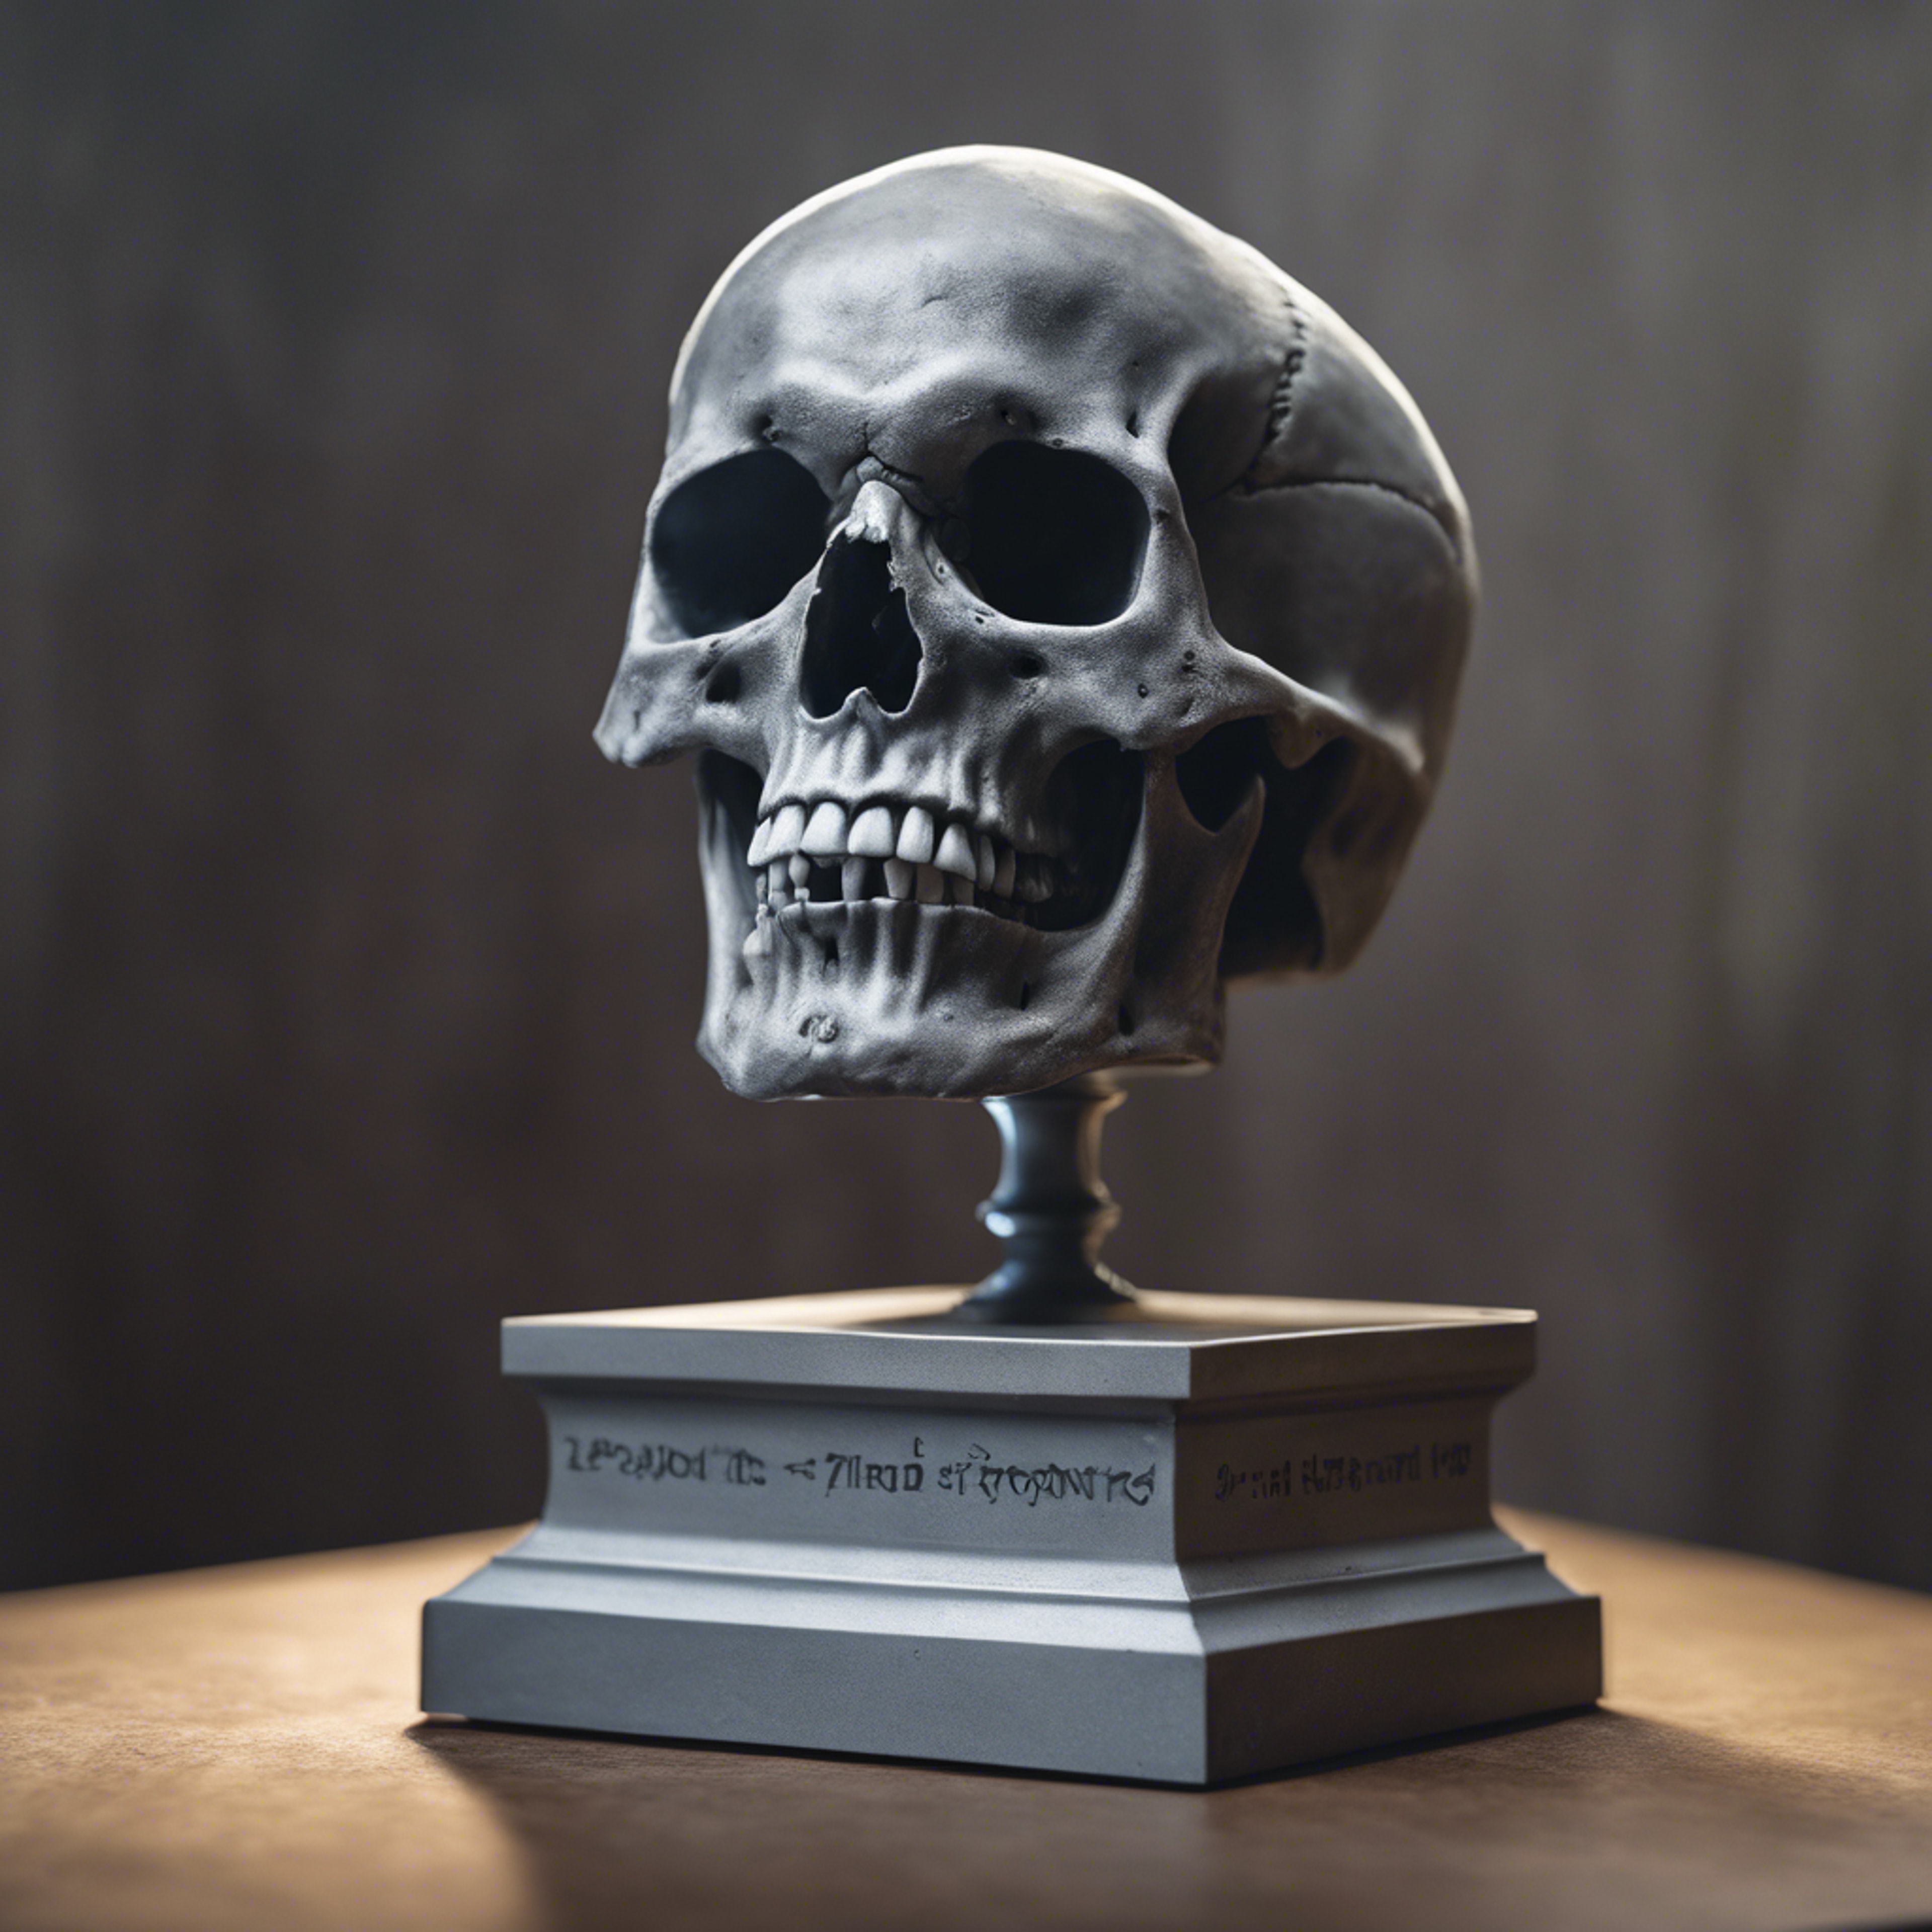 A spot-lit gray skull on a pedestal, starring in a classic horror movie scene. Тапет[96b08be545414606ae5a]